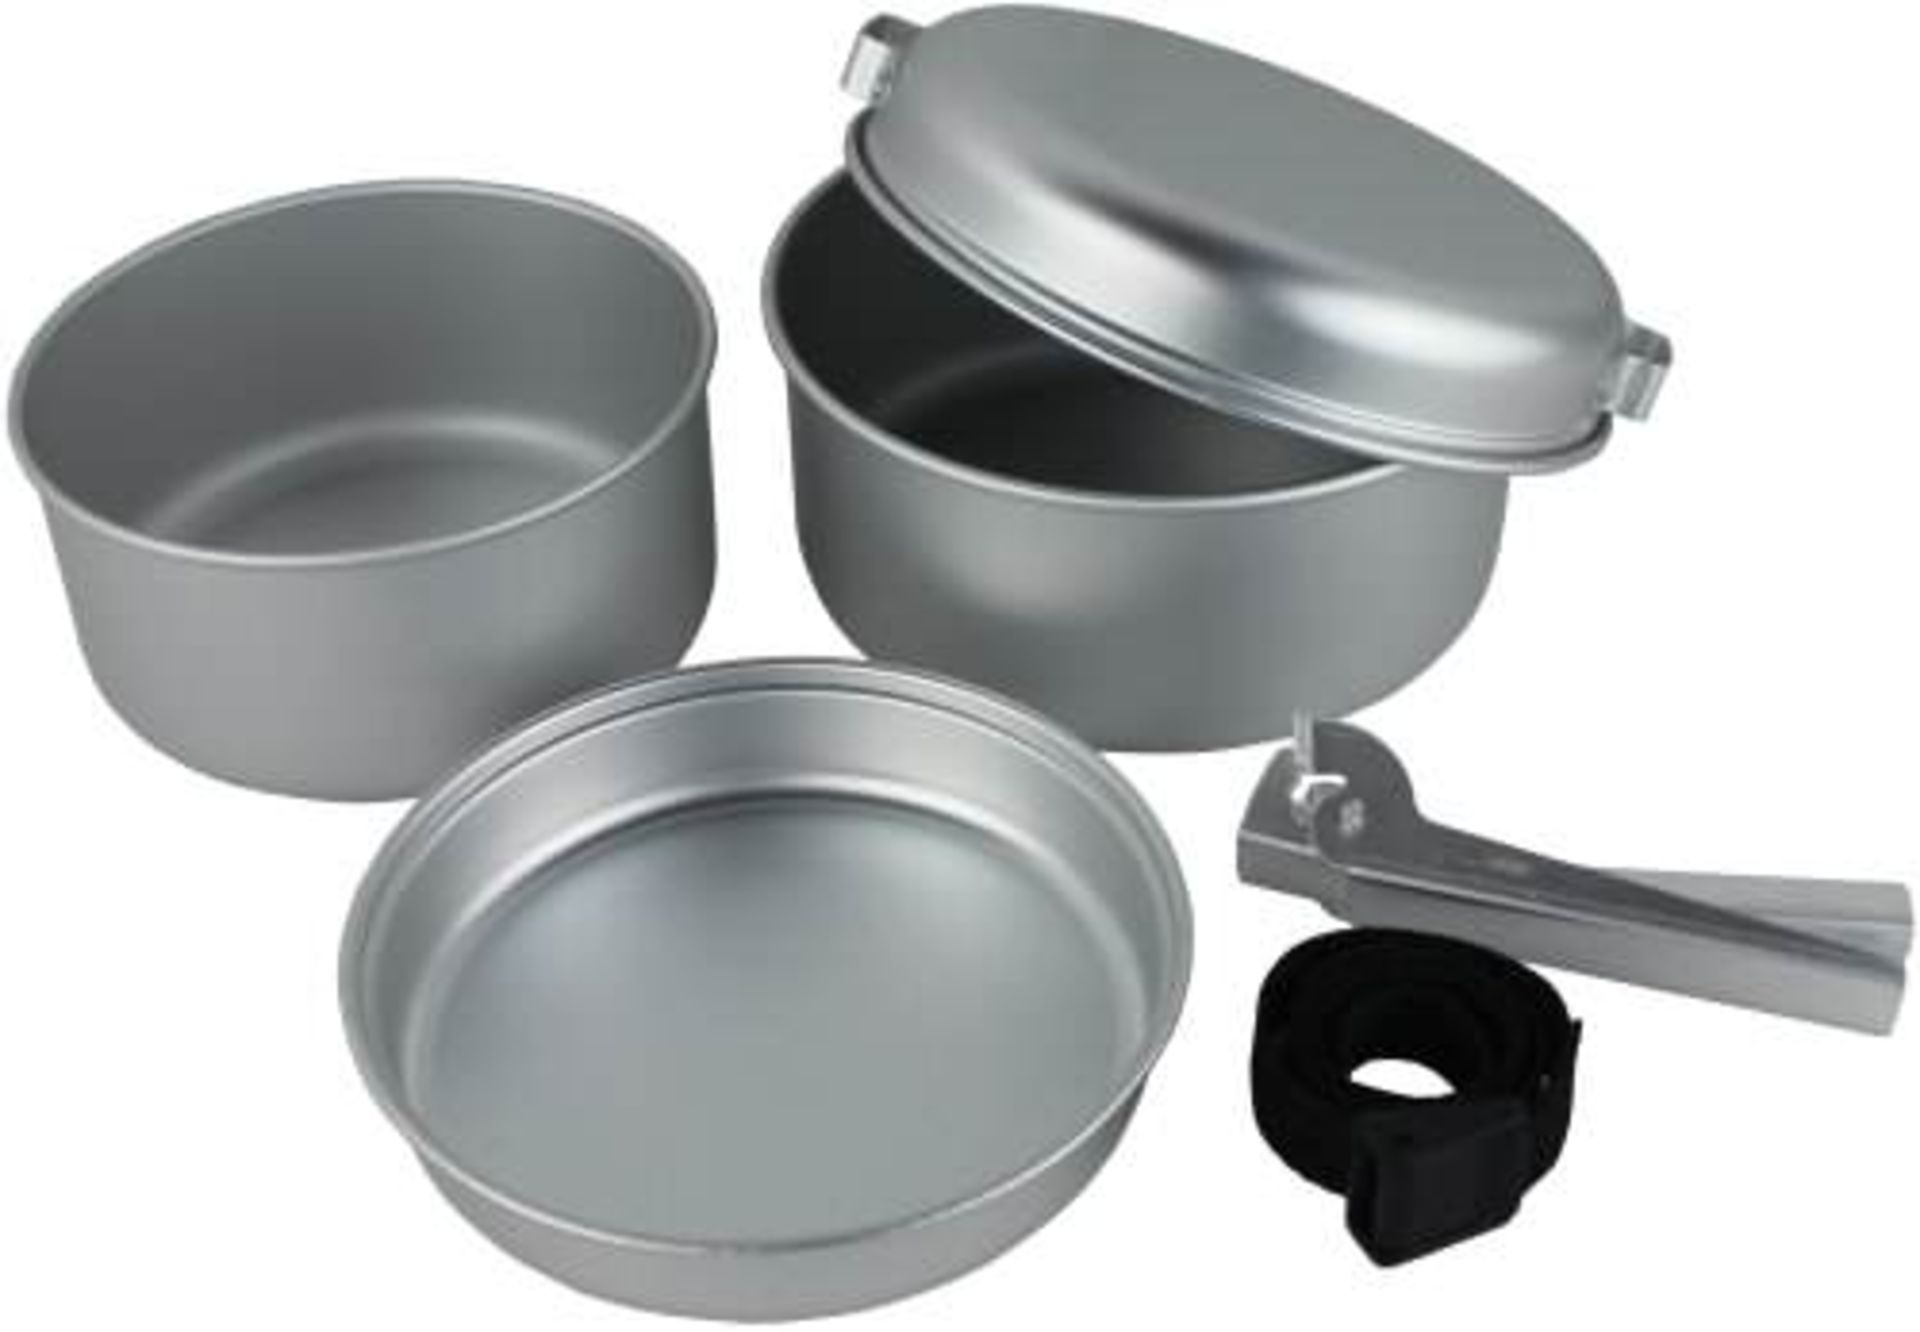 V Grade A 5 Piece Camping Cook Set Includes 2 pots, 1 pan 1 lid and 1 handle RRP9.99 Camping